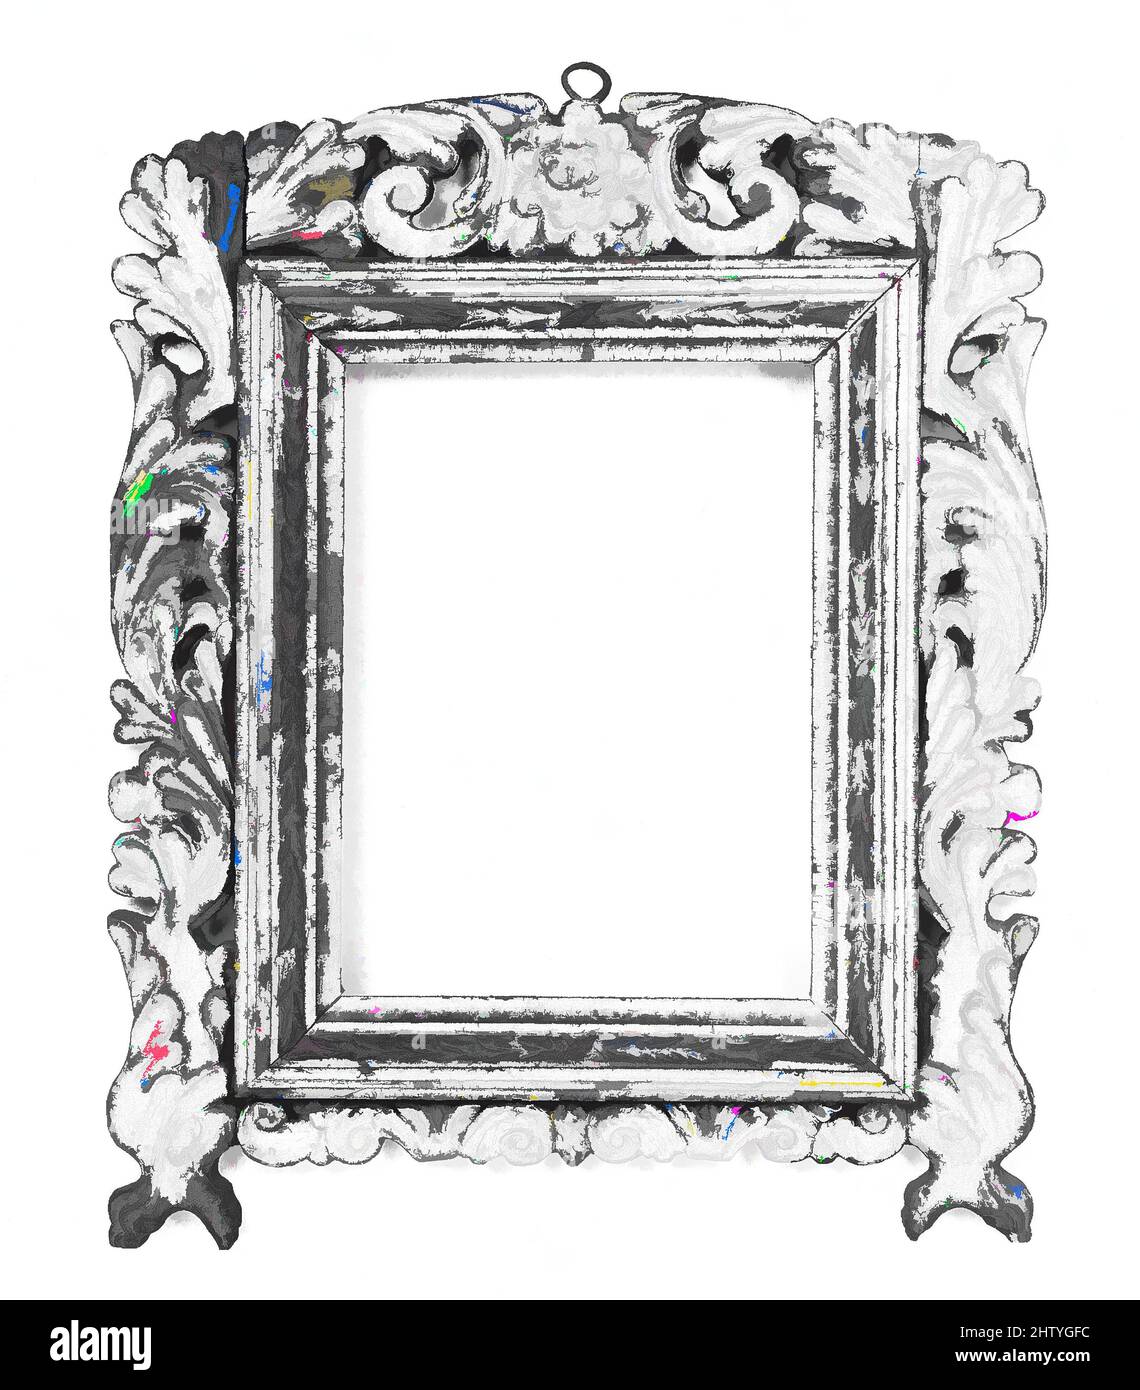 Art inspired by Mirror frame, late 18th century, Northwest Spain (?), Walnut, 34.9 x 28, 19 x 14, 22.4 x 17 cm., Frames, Classic works modernized by Artotop with a splash of modernity. Shapes, color and value, eye-catching visual impact on art. Emotions through freedom of artworks in a contemporary way. A timeless message pursuing a wildly creative new direction. Artists turning to the digital medium and creating the Artotop NFT Stock Photo